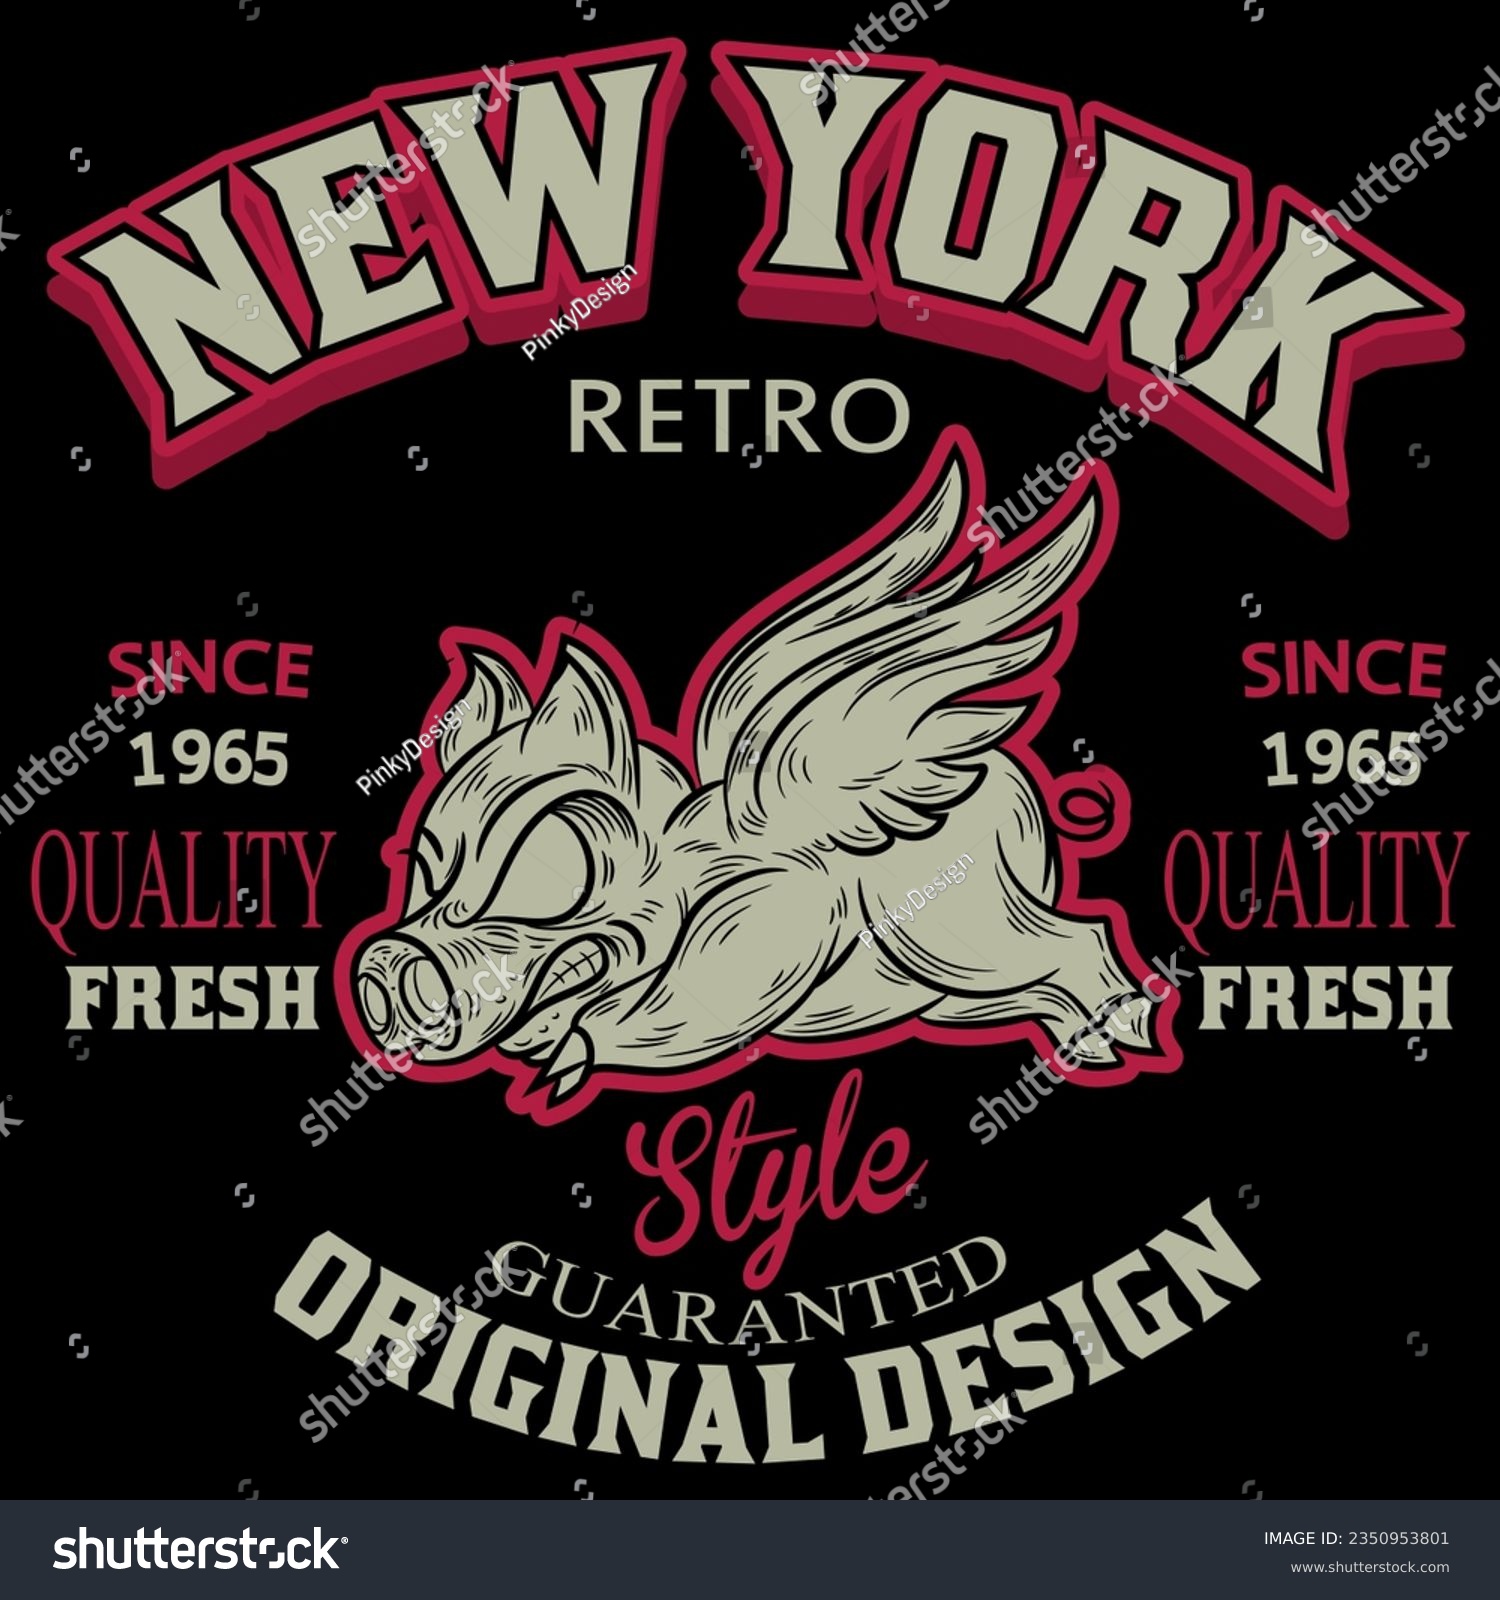 SVG of Illustration bike motorcycle with ping and wings, Since 1965 and Patchwork emblem crest text New York retro Original Design Fresh. tattoo style svg